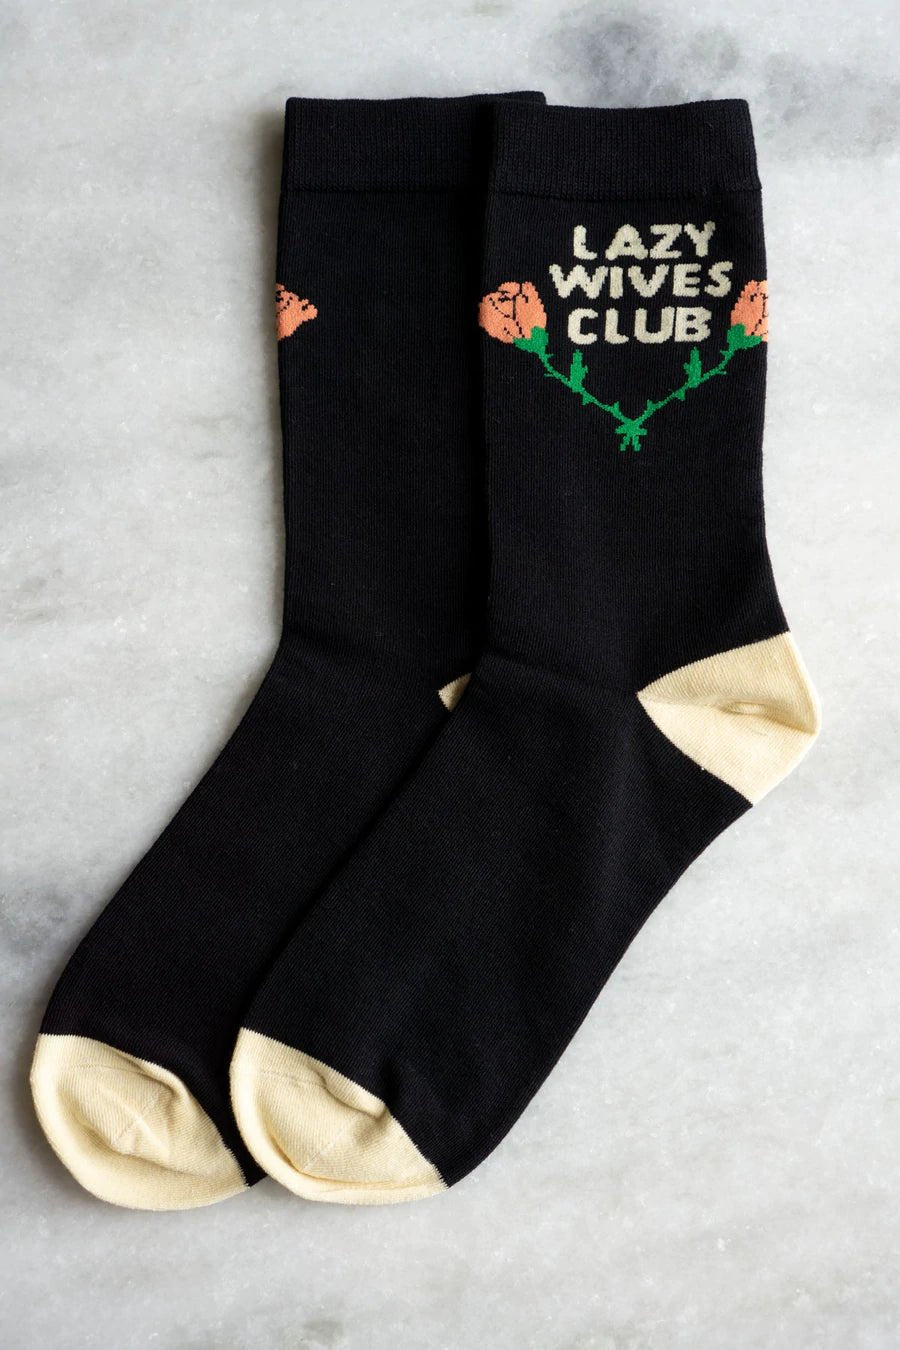 Lazy Wives Club Socks | Stay Home Club - Pretty by Her- handmade locally in Cambridge, Ontario